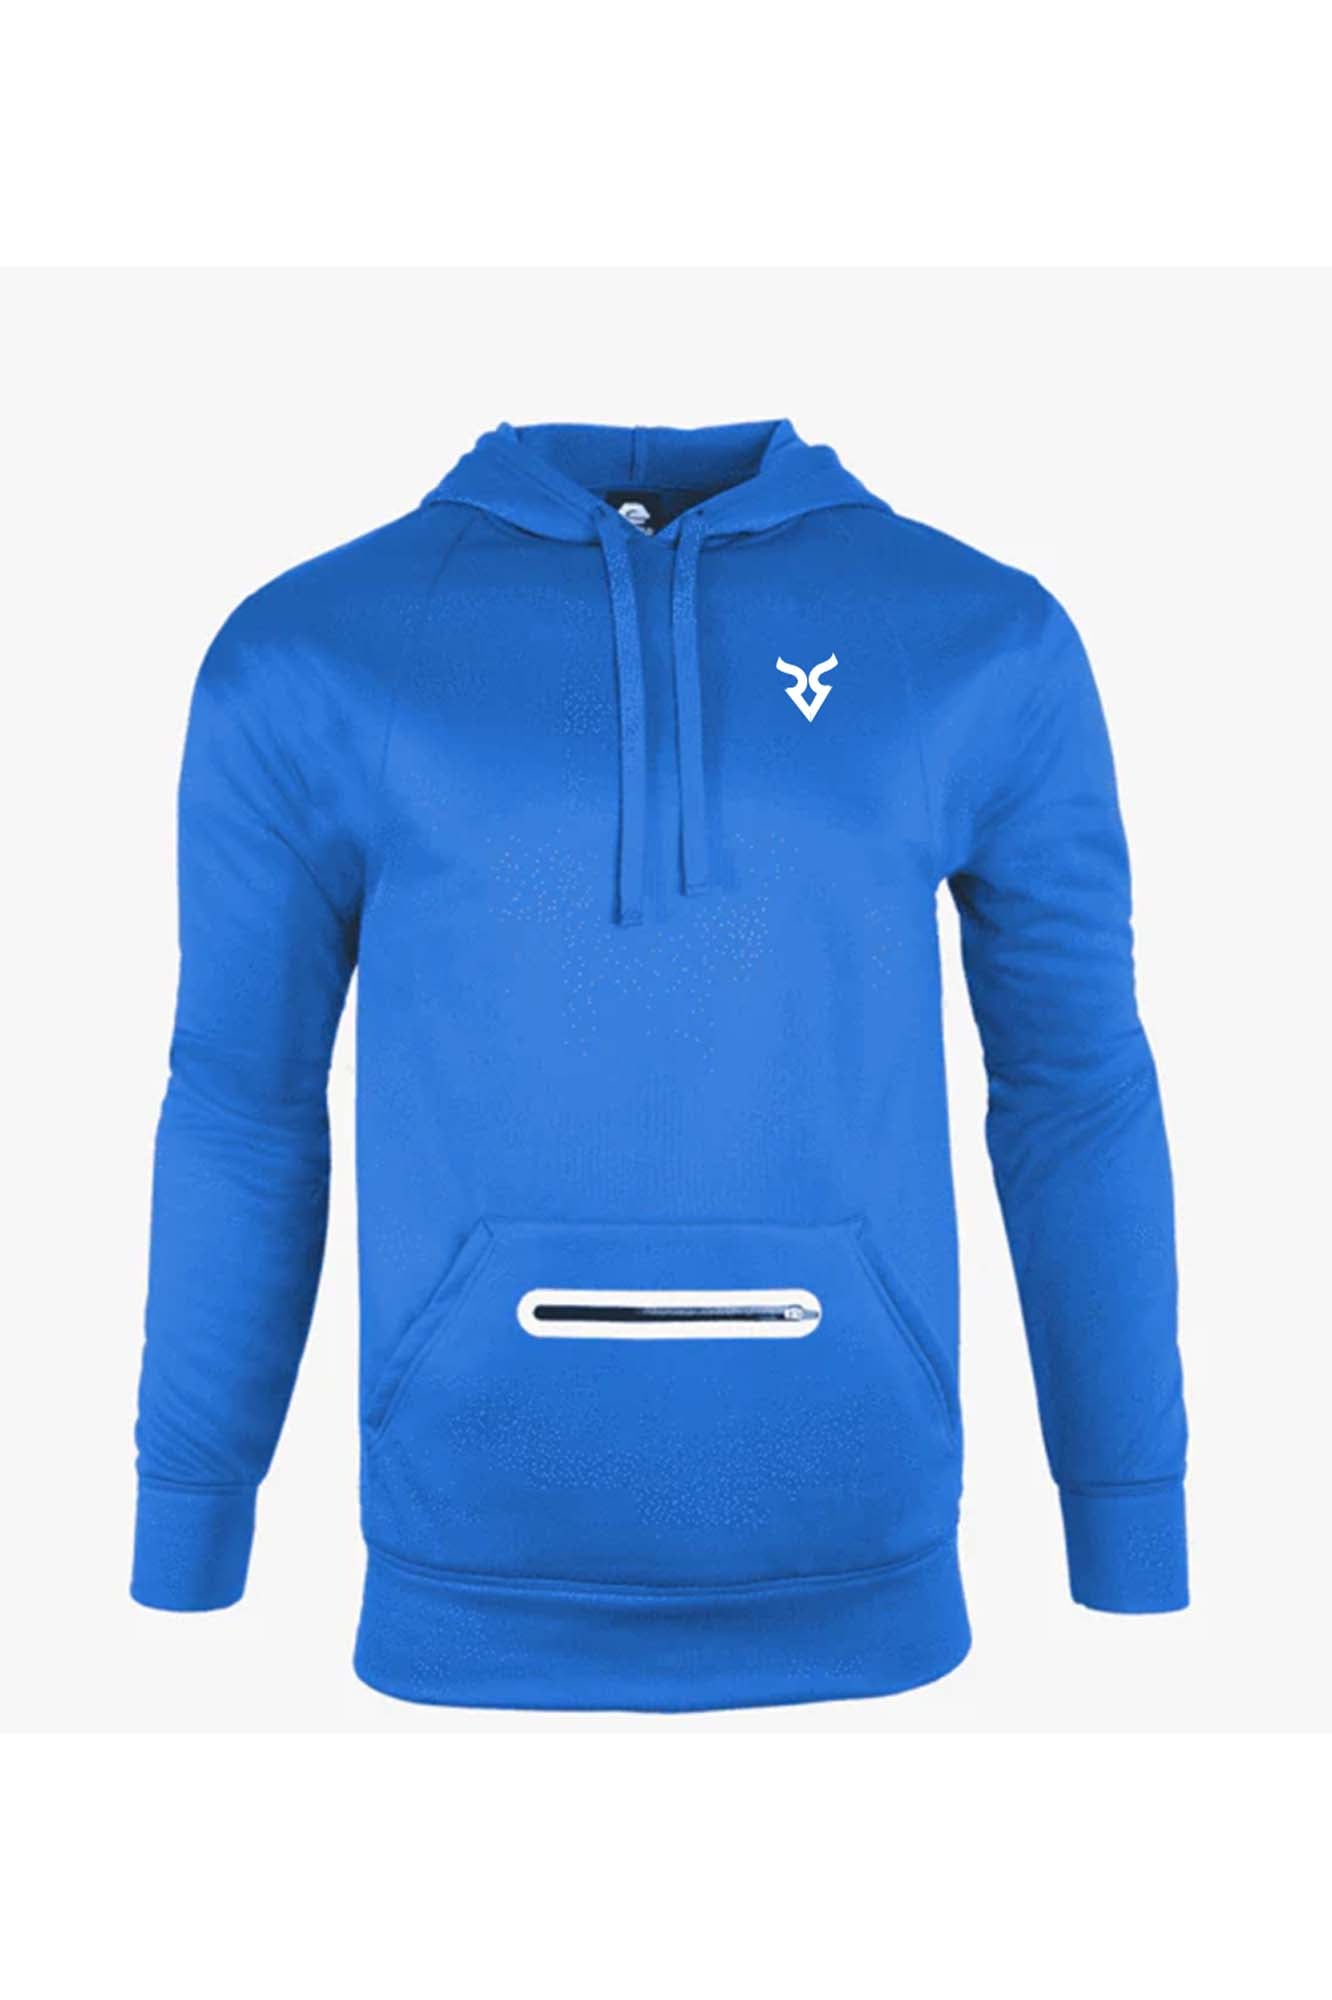 Evolution of the Goat Polyester Hoodie with Pouch Zipper